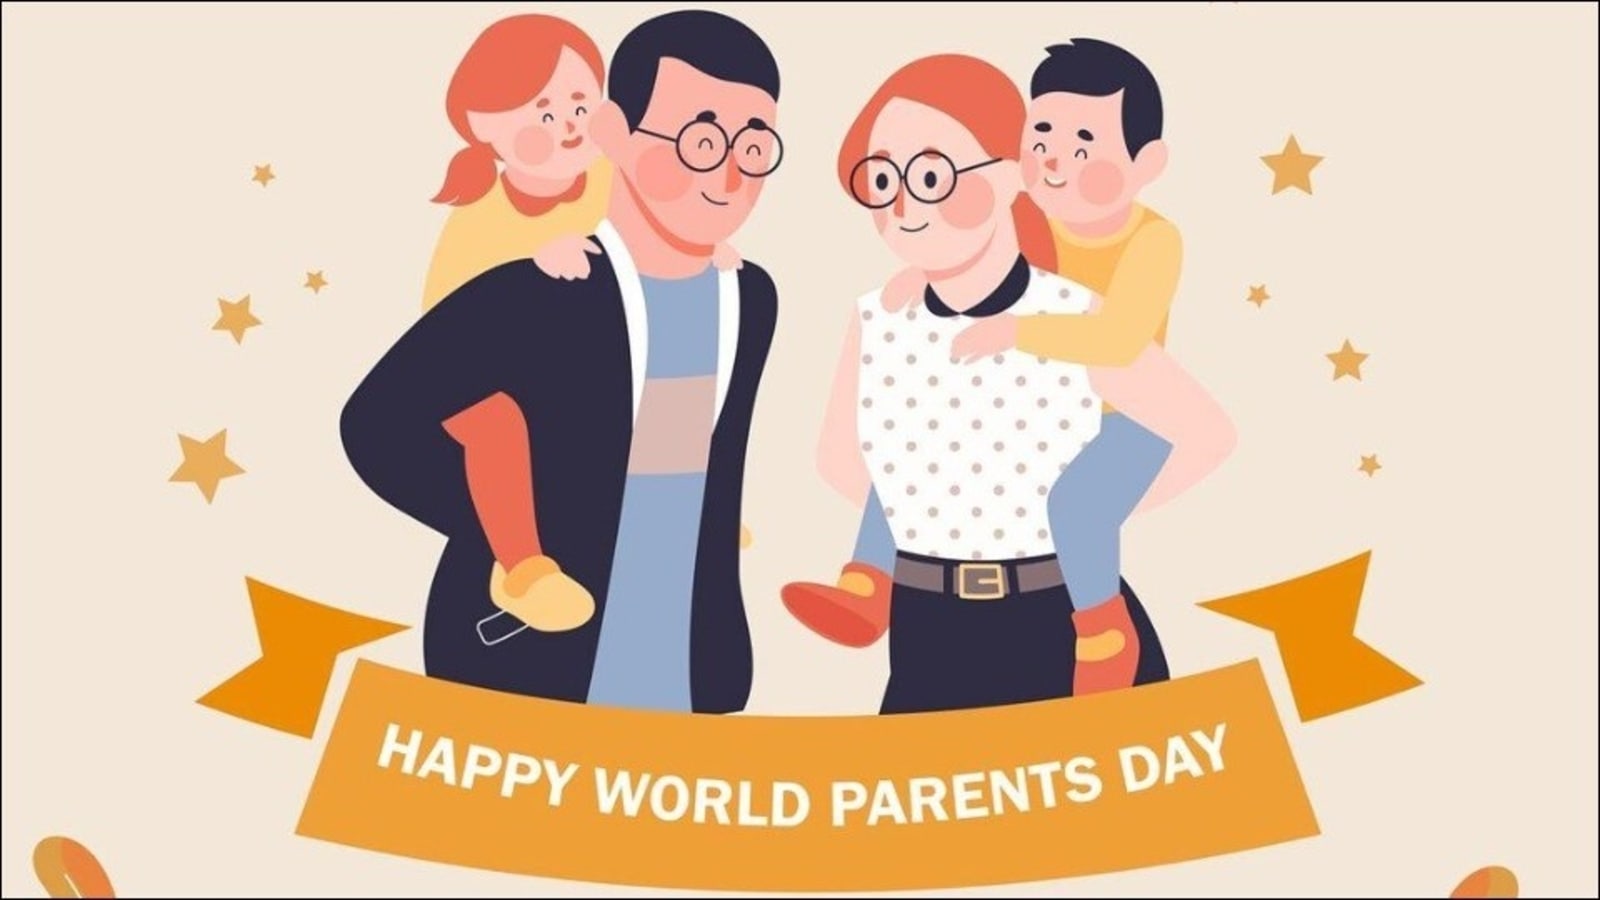 Happy Parents Day 2021 Date, significance, theme, quotes to wish on